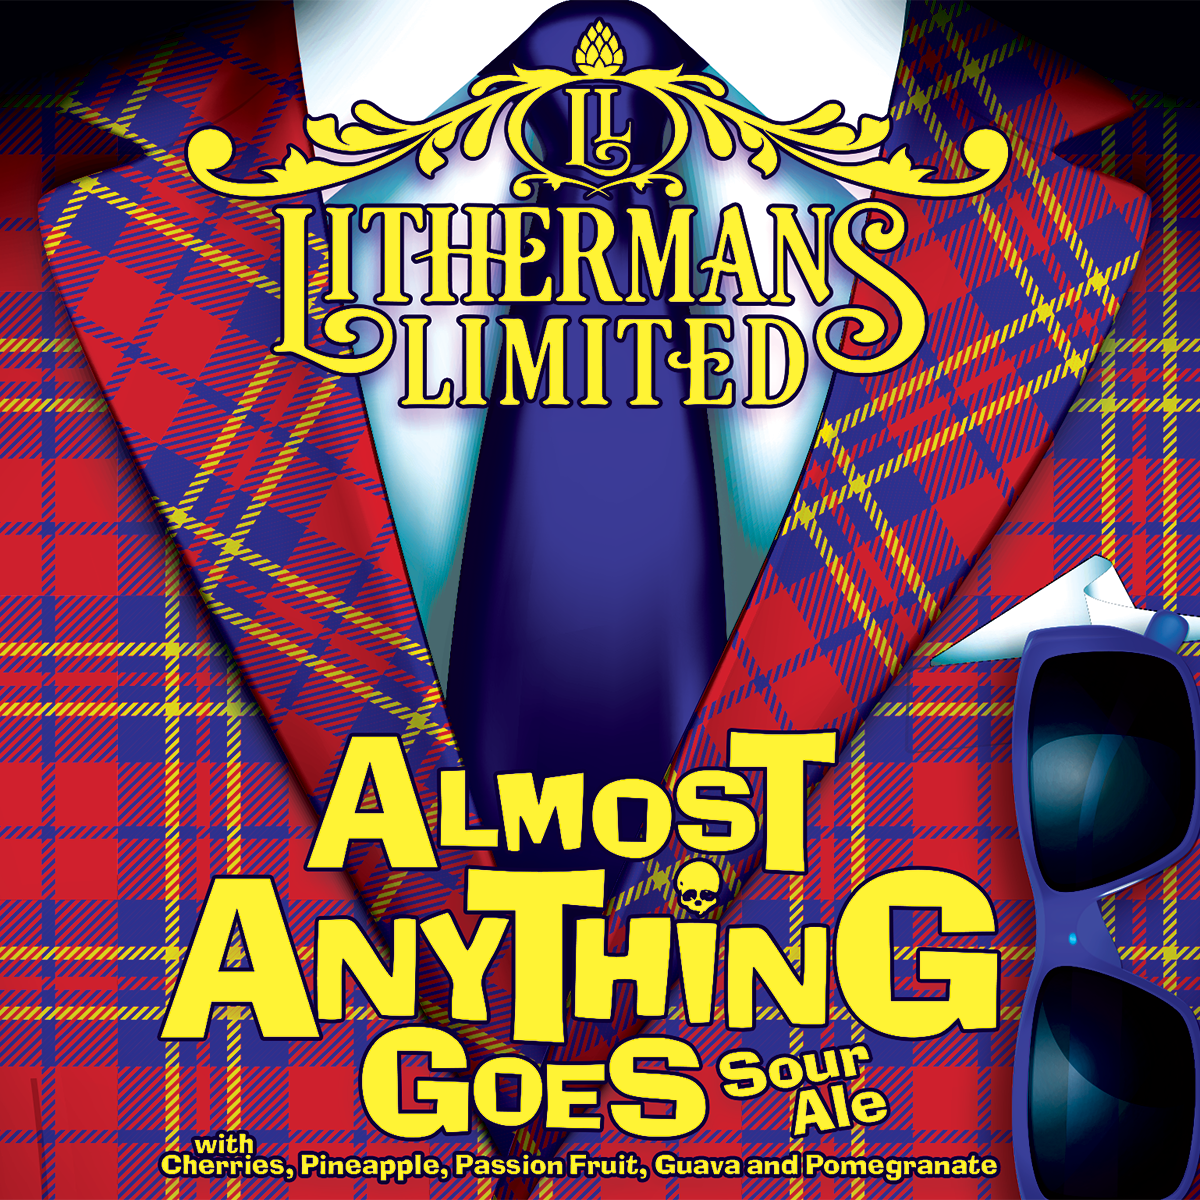 lithermans limited brewery nh craft beer label untappd almost anything goes fruitpunch sour ale